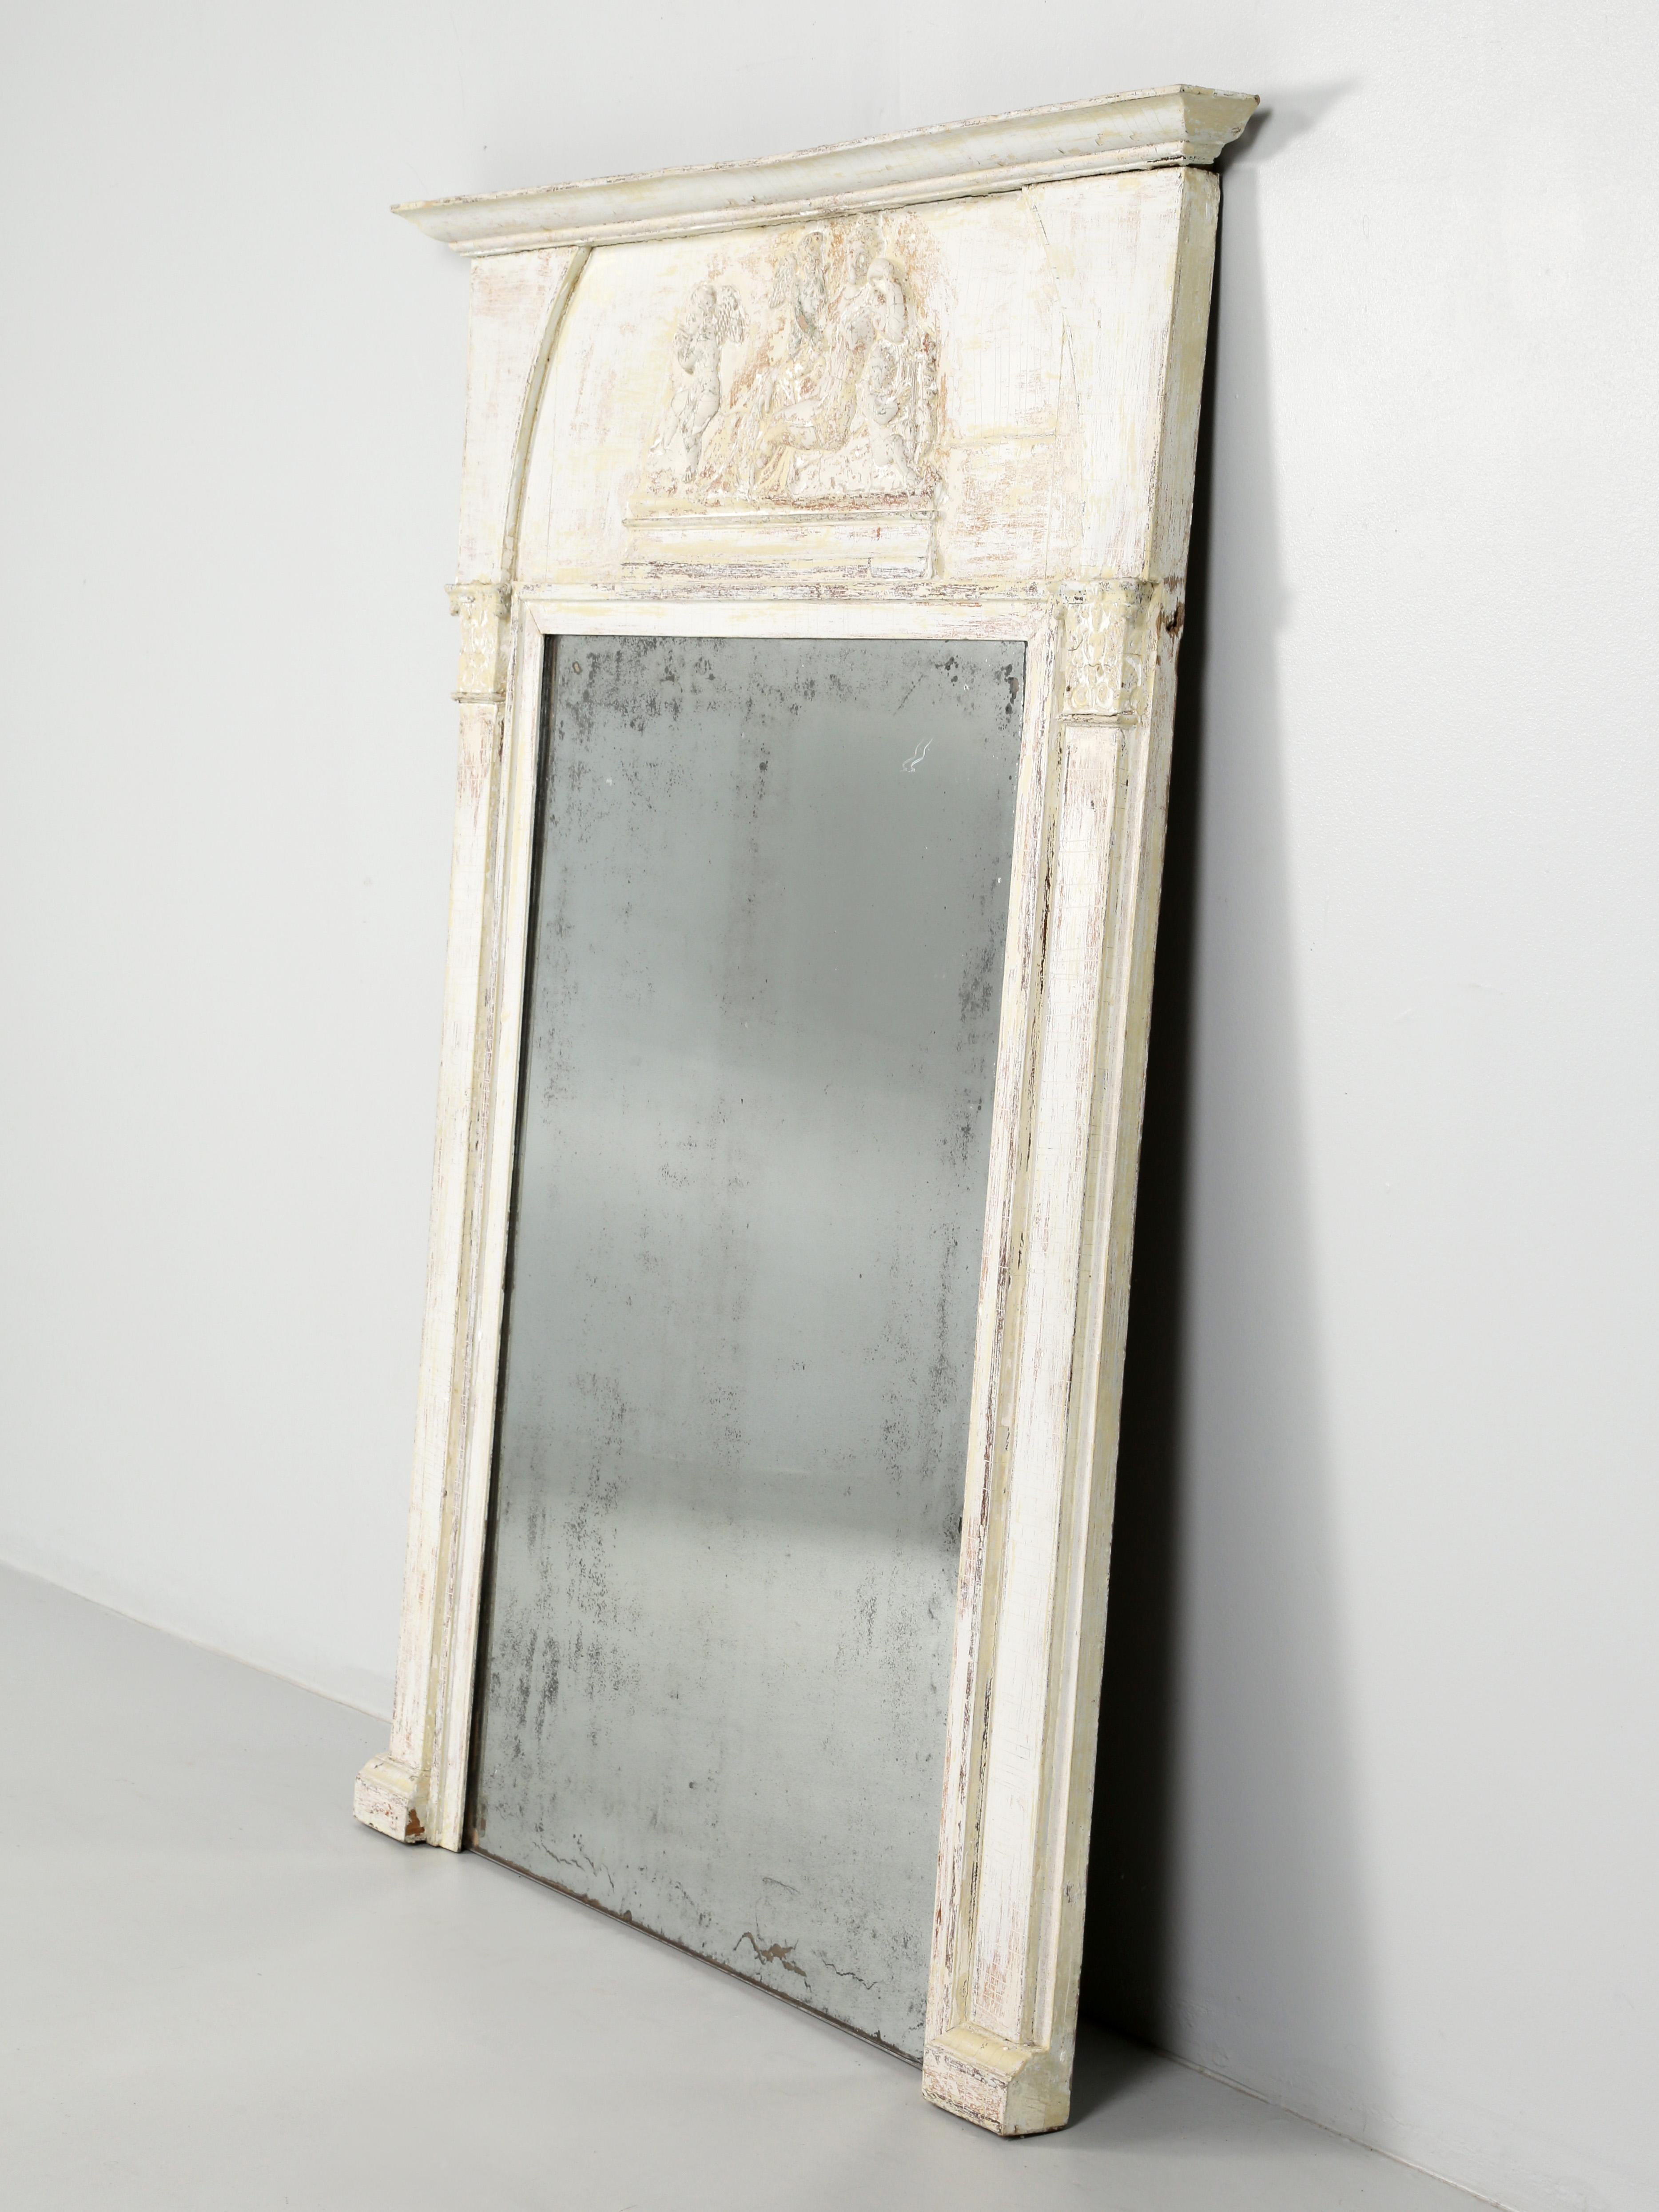 Antique French painted Trumeau mirror, which originated as a center pillar covered with a mirror supporting a large doorway. By the 1800's in France, the Trumeau mirrors became an over-mantle decoration above a fireplace. Our antique French trumeau